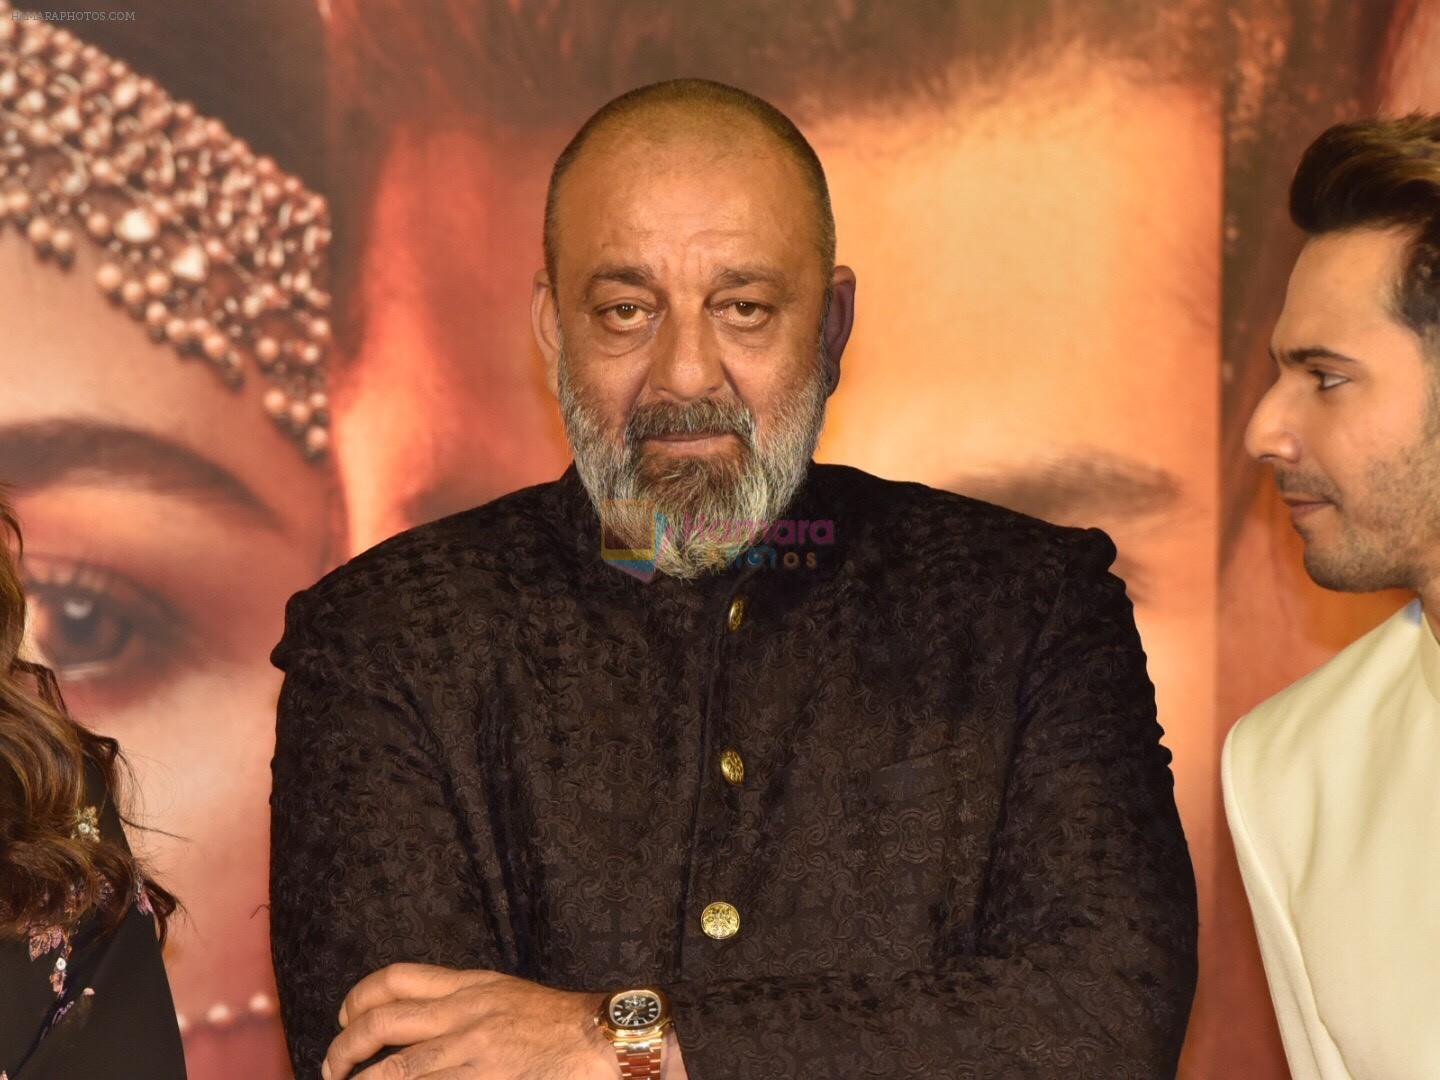 Sanjay Dutt at the Teaser launch of KALANK on 11th March 2019